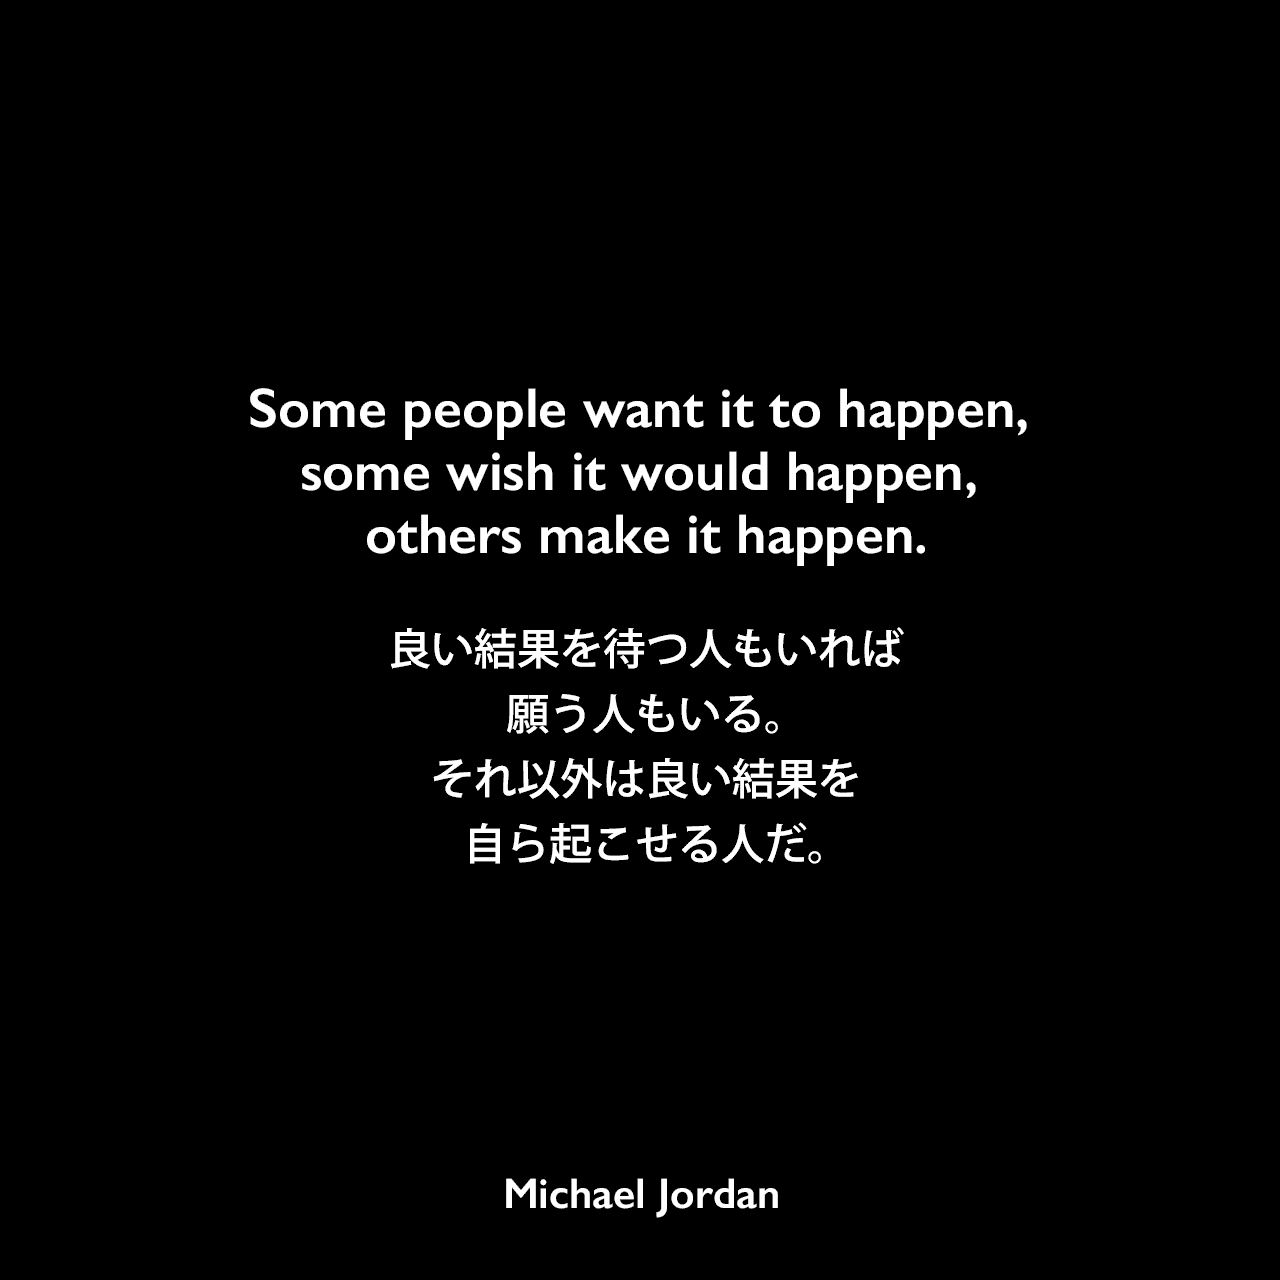 Some people want it to happen, some wish it would happen, others make it happen.良い結果を待つ人もいれば、願う人もいる。それ以外は良い結果を自ら起こせる人だ。Michael Jordan